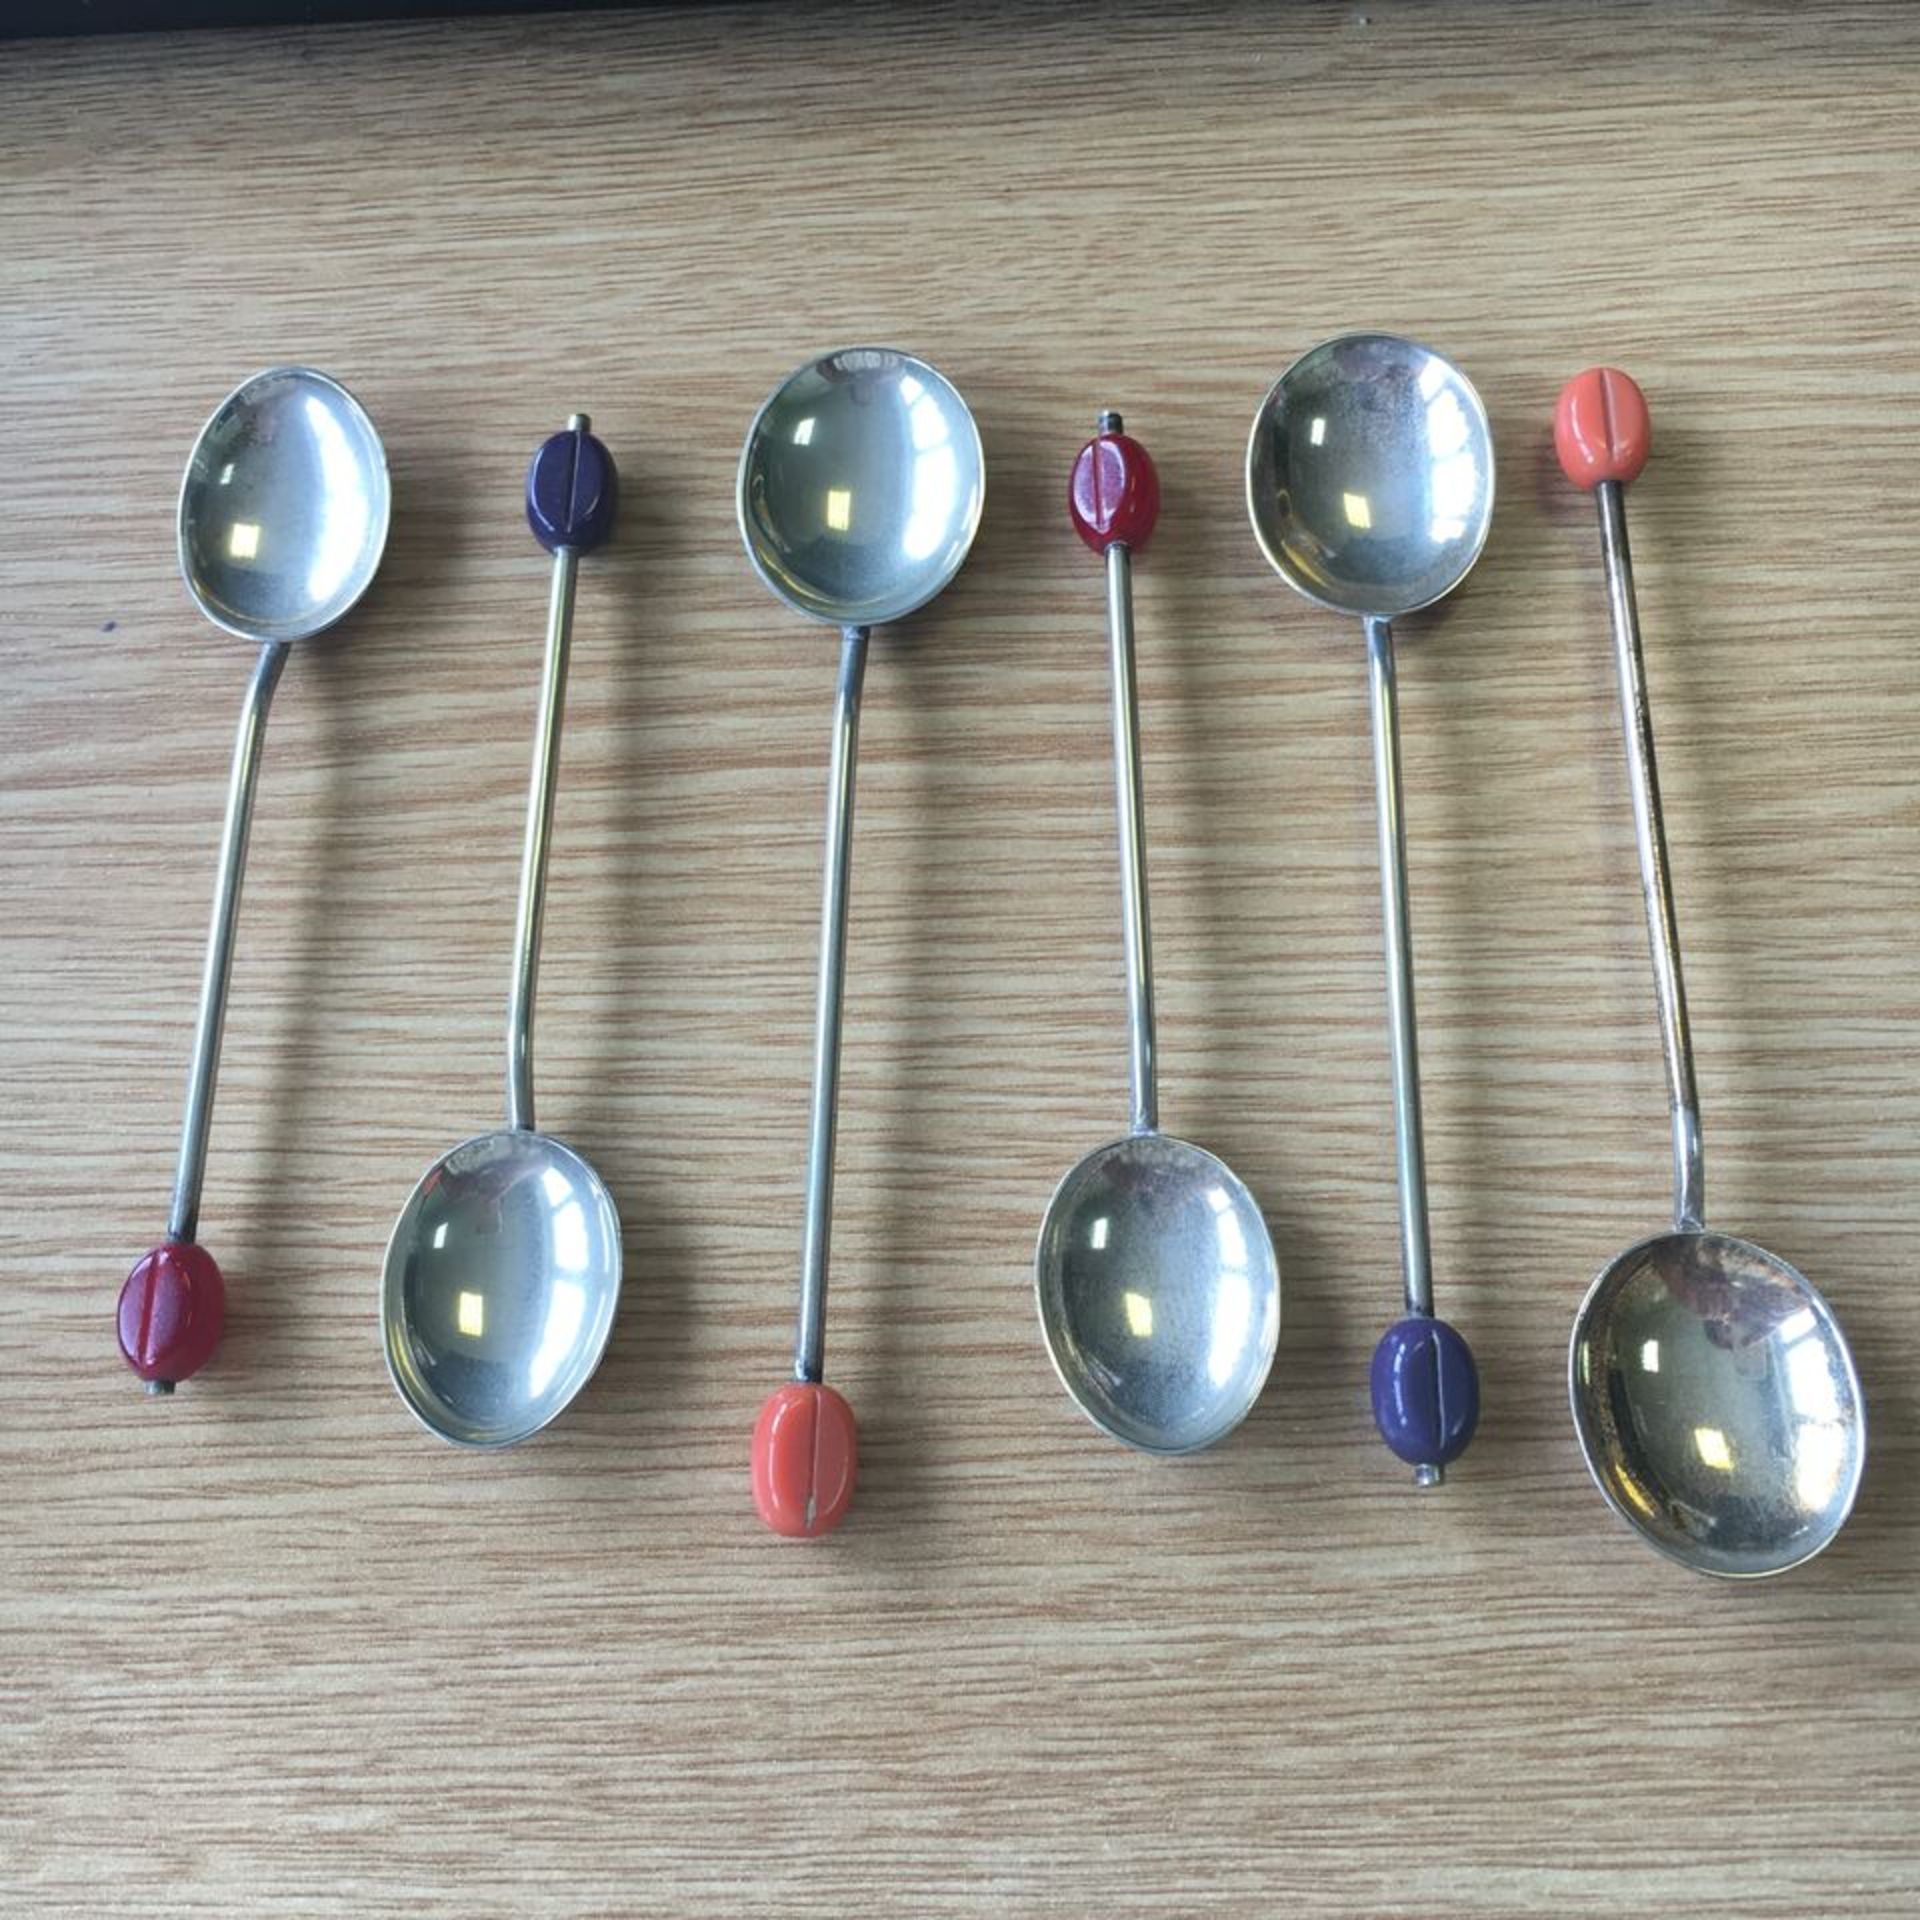 GROUP OF 6 VINTAGE SILVER PLATED COFFEE BEAN SPOONS. FREE UK DELIVERY. NO VAT.